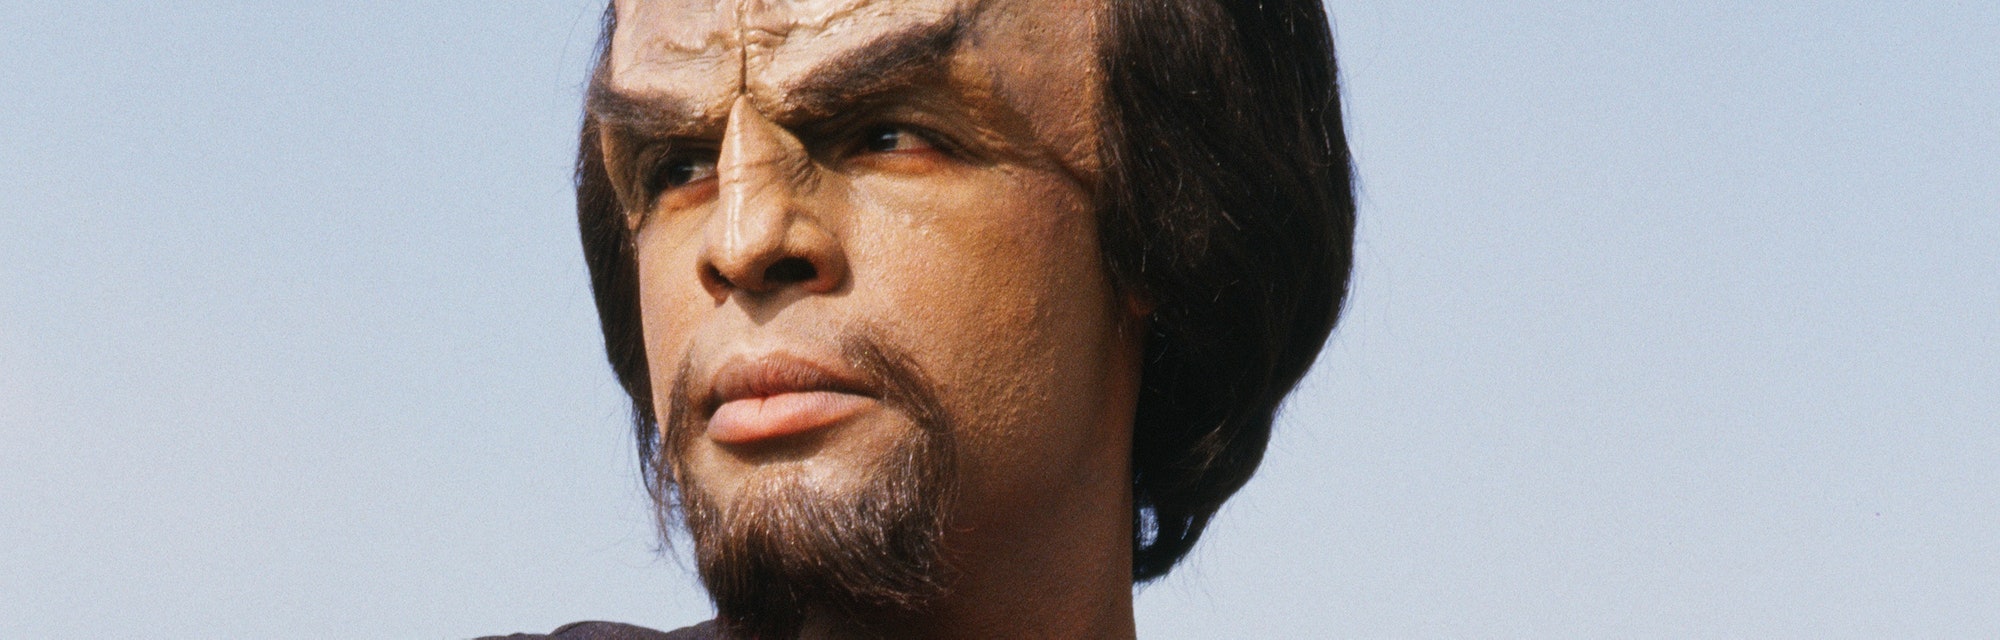 LOS ANGELES, CA - 1987:  Actor Michael Dorn, who plays Lt. Worf in the TV show "Star Trek-The Next G...